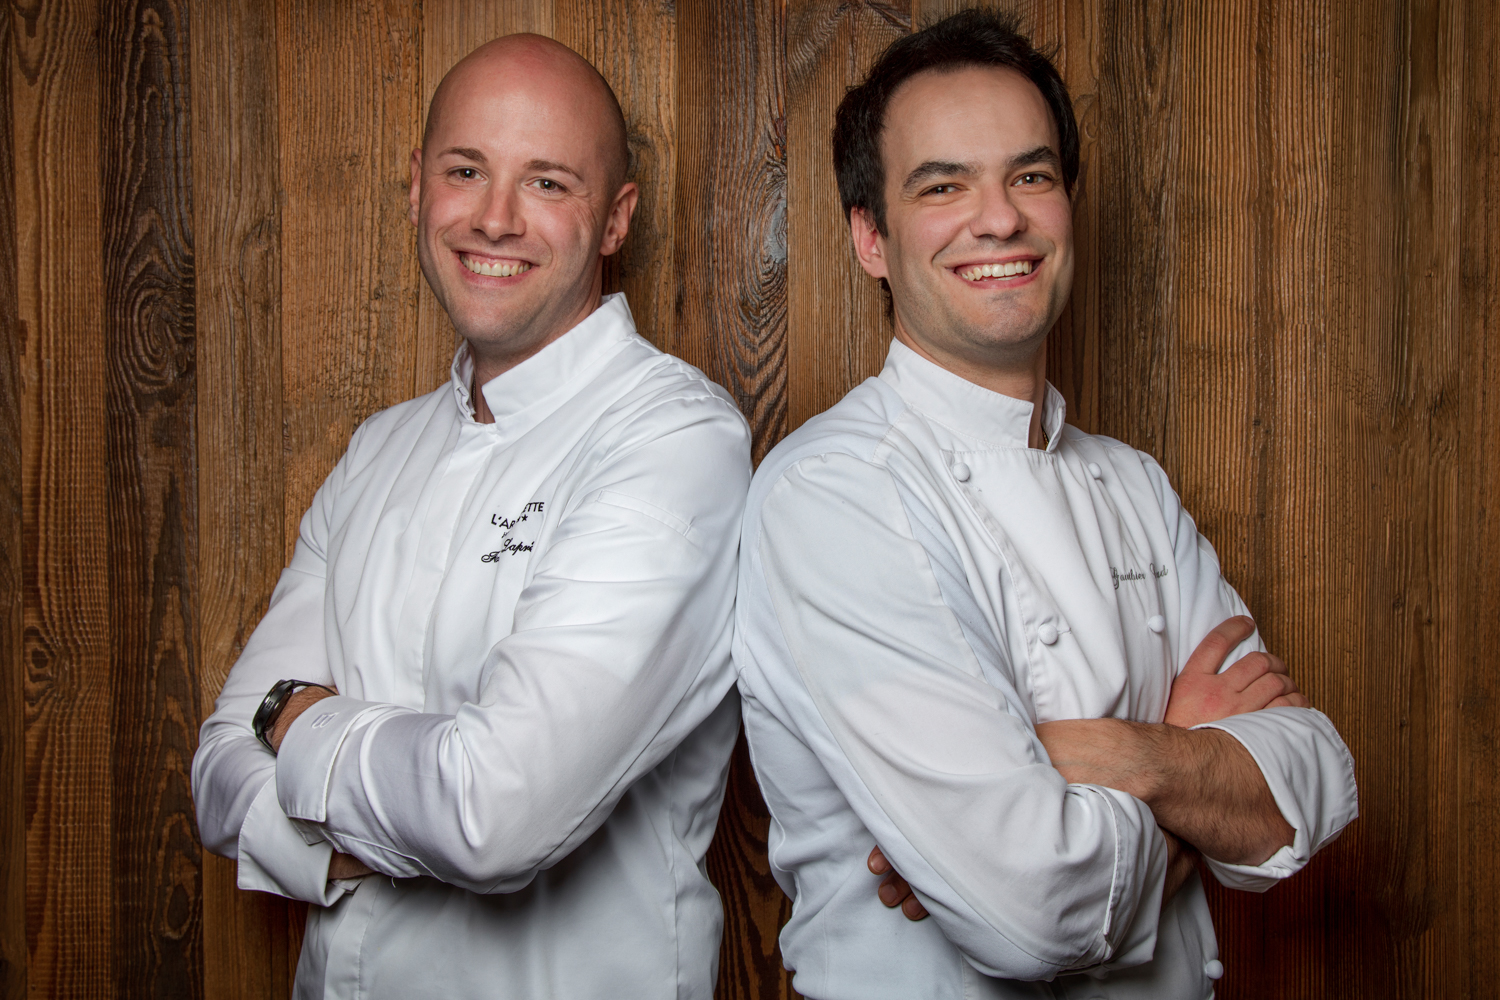 PORTRAITS OF THE CHEFS